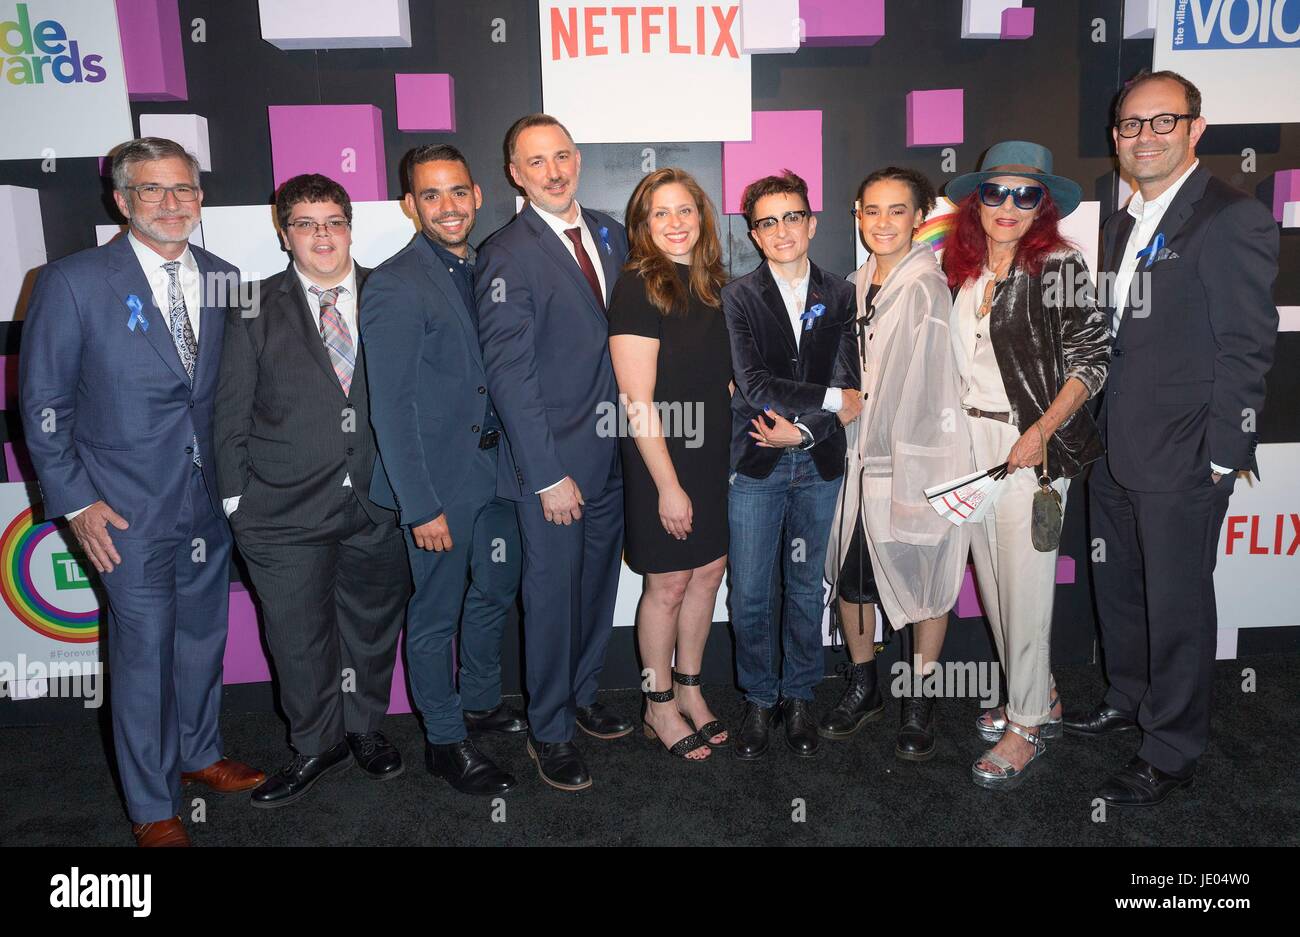 New York, NY, USA. 21st June, 2017. Peter Barbey, Gavin Grimm, guest, Stephen Mooallem, Leanne Pittsford, Masha Gessen, Tyler Ford, Patricia Field, guest at arrivals for The Village Voice Pride Awards, Capitale, New York, NY June 21, 2017. Credit: Lev Radin/Everett Collection/Alamy Live News Stock Photo